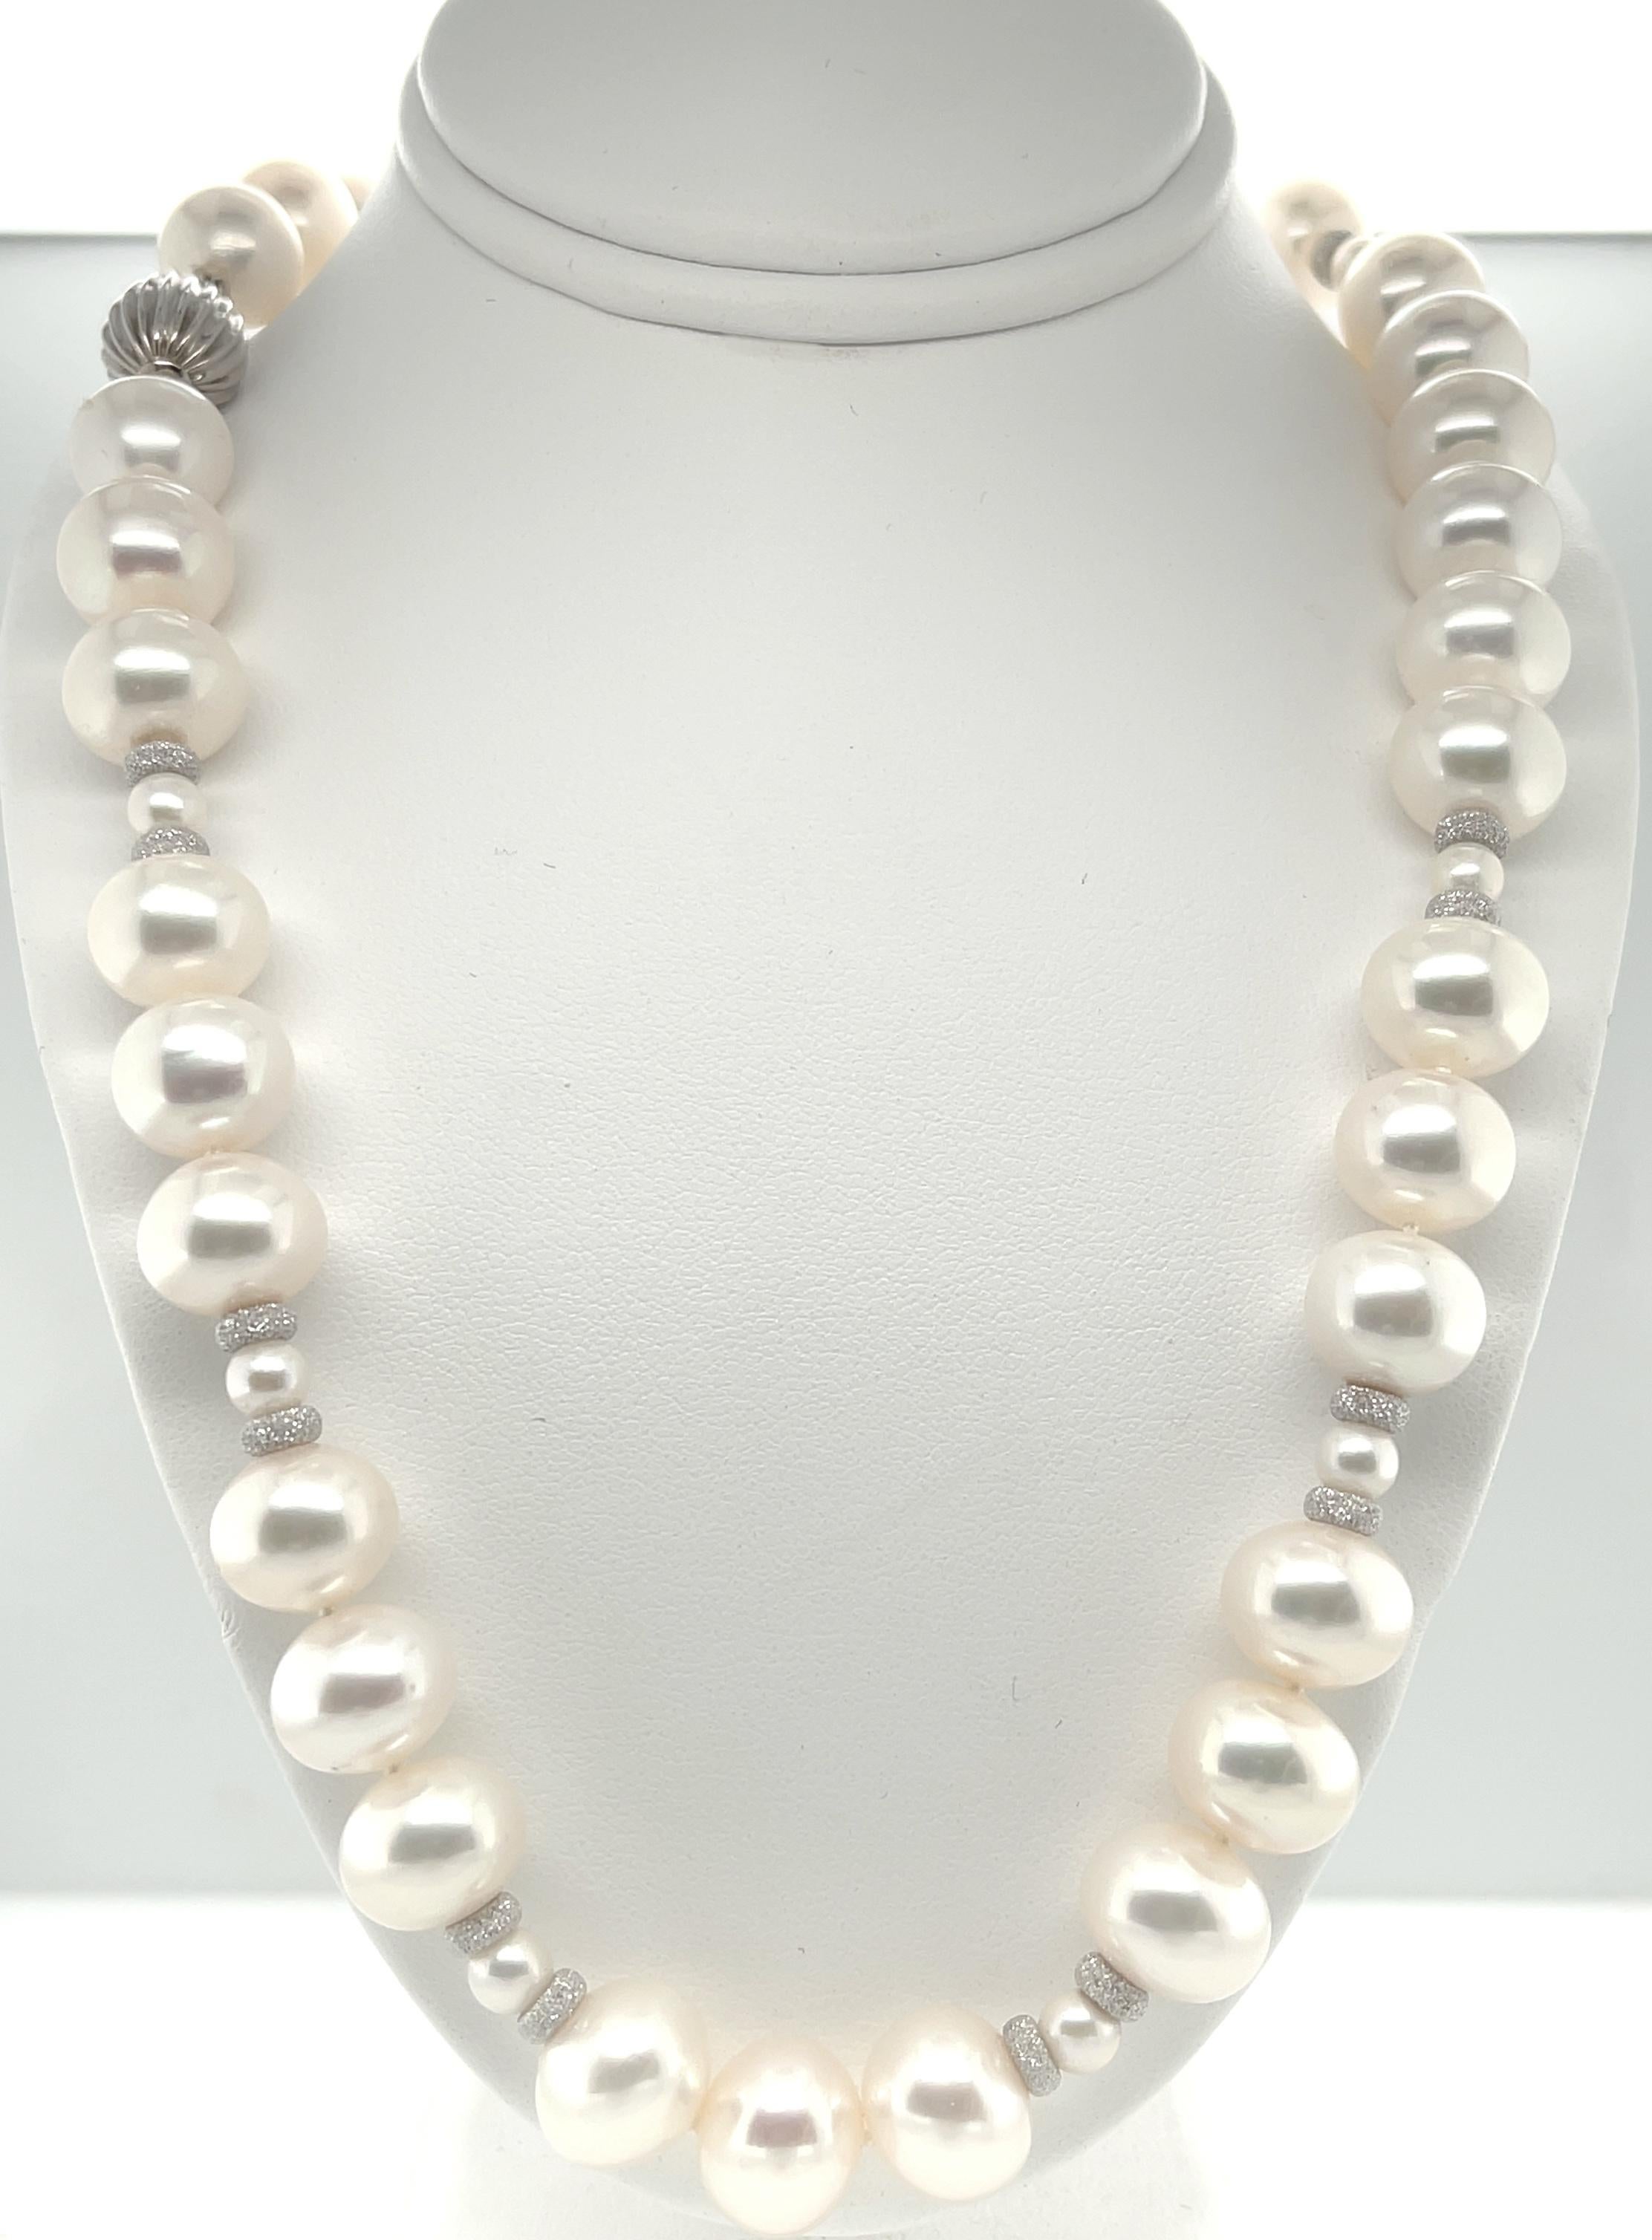 Round Cut White Freshwater Pearl Necklace with White Gold Accents, 18.5 Inches For Sale